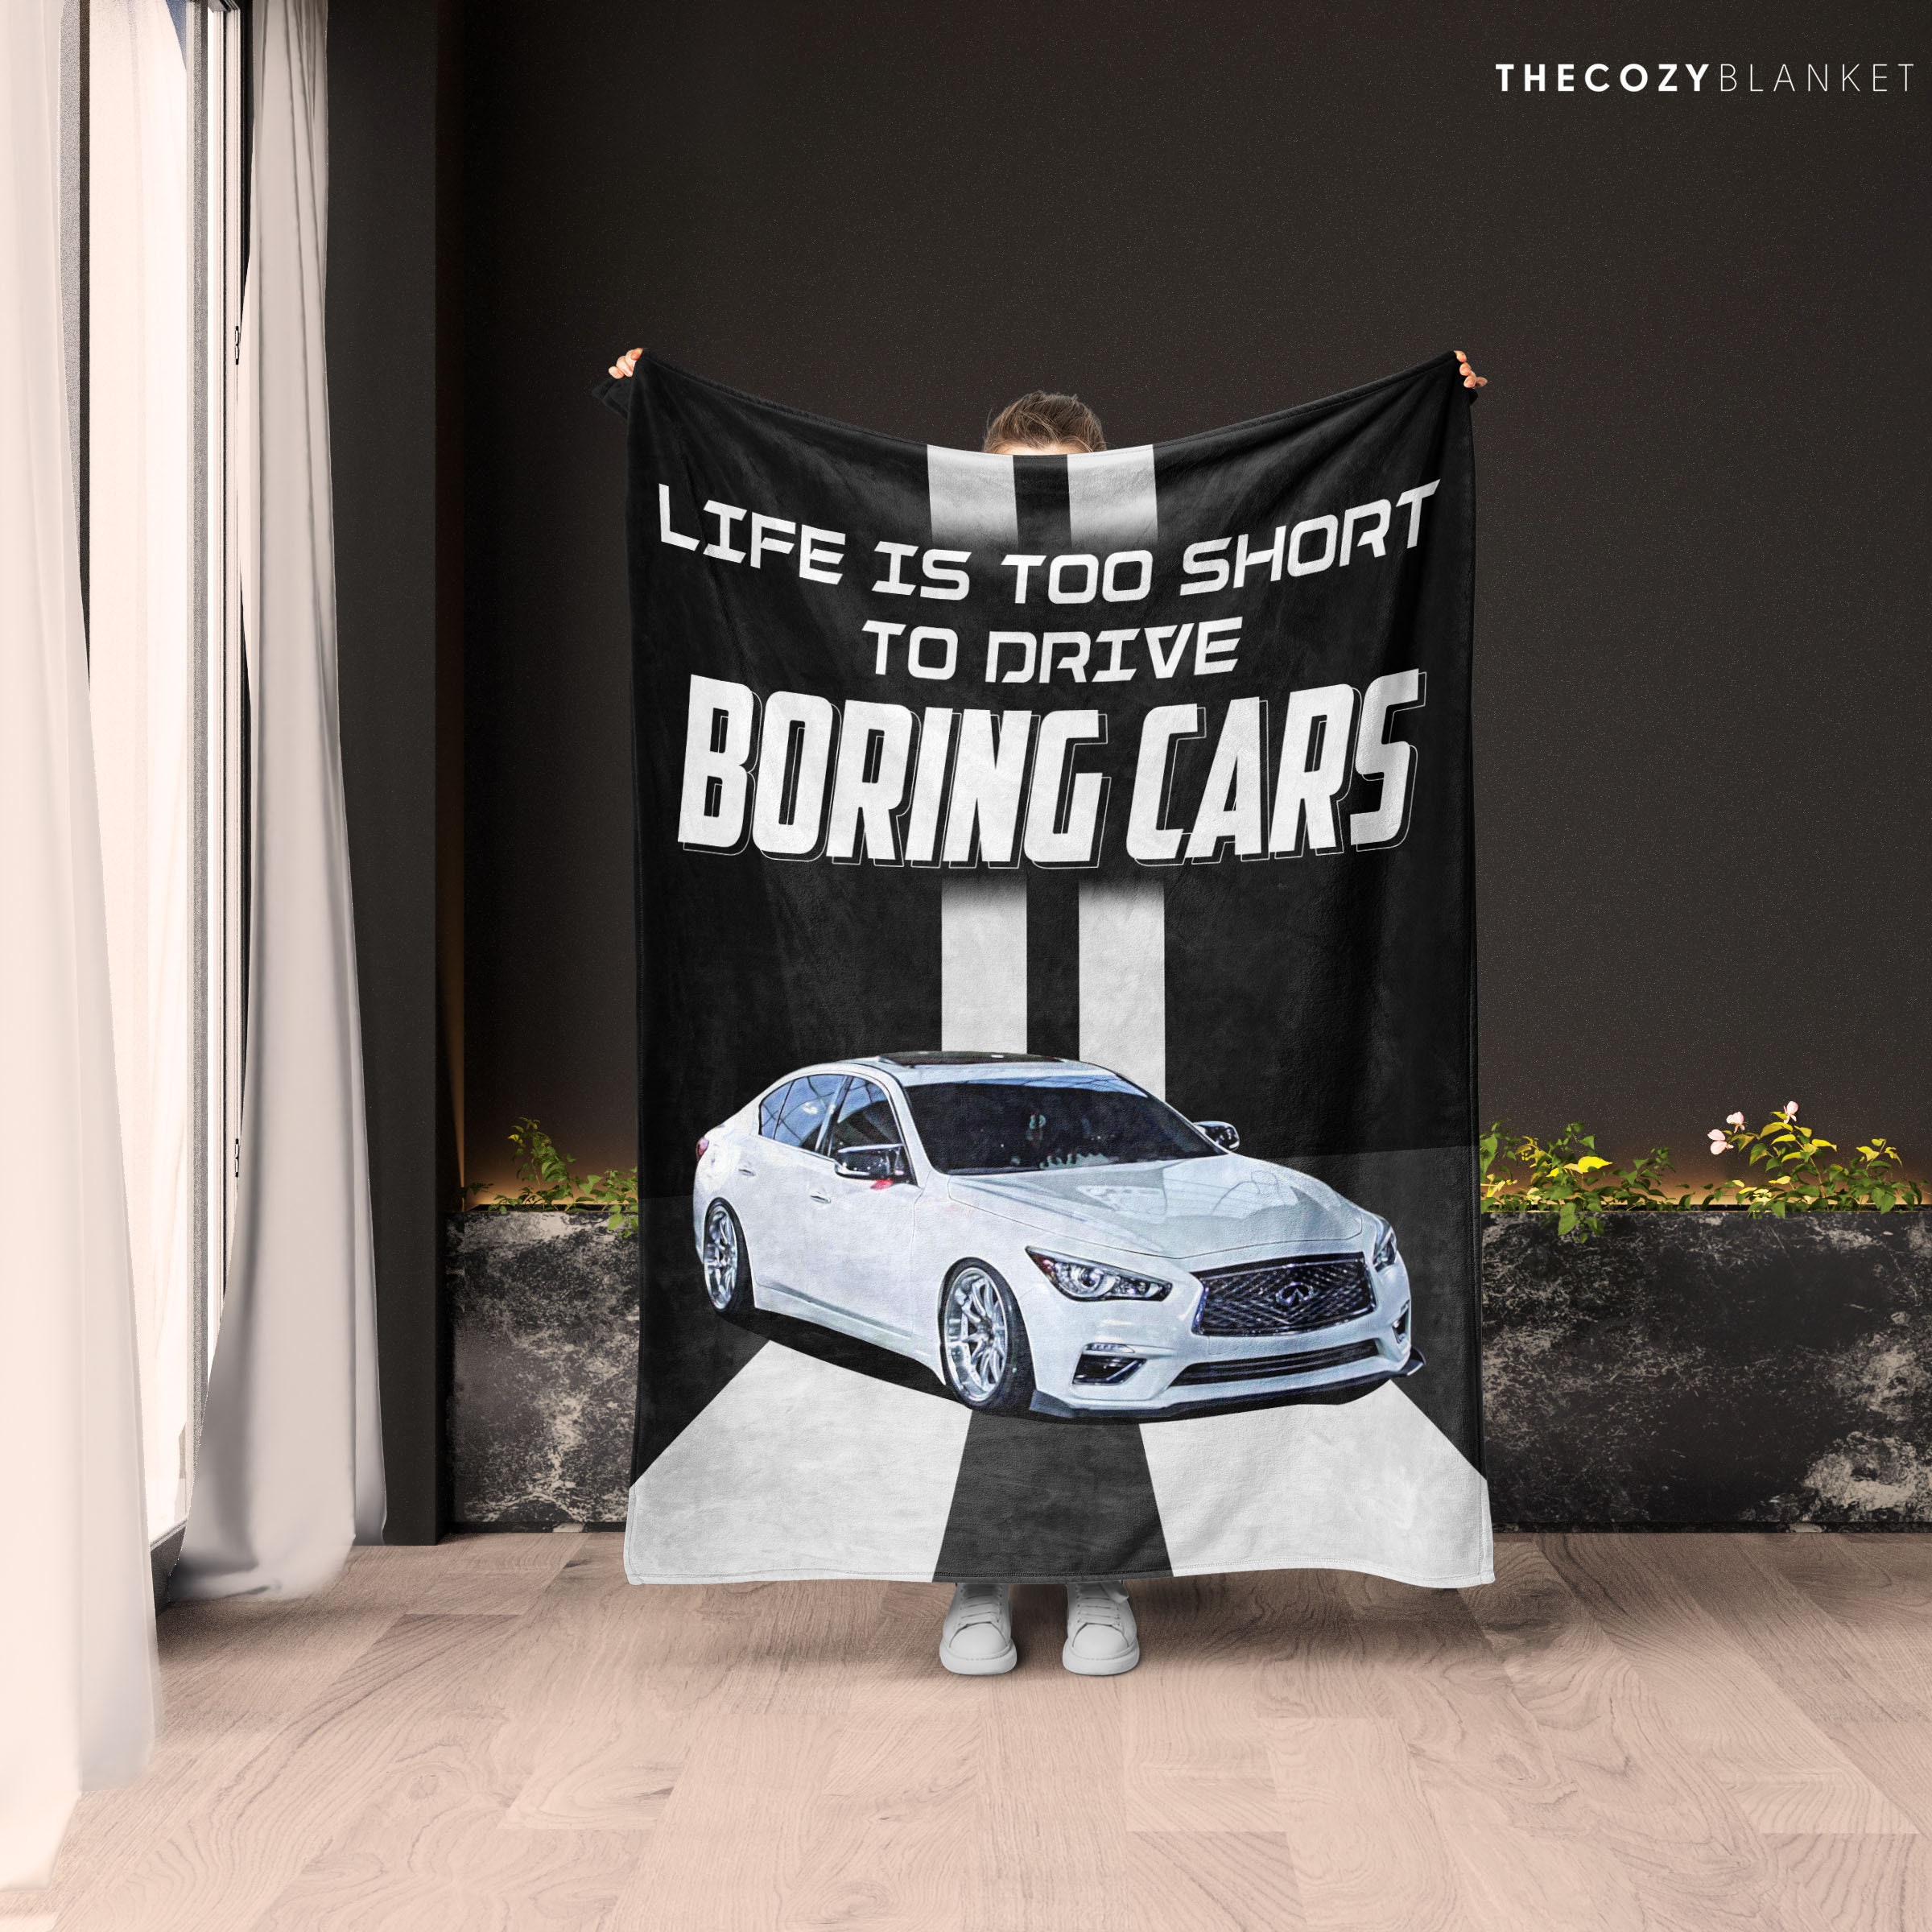 Gift Idea for the Car Loving Guy - Our Thrifty Ideas